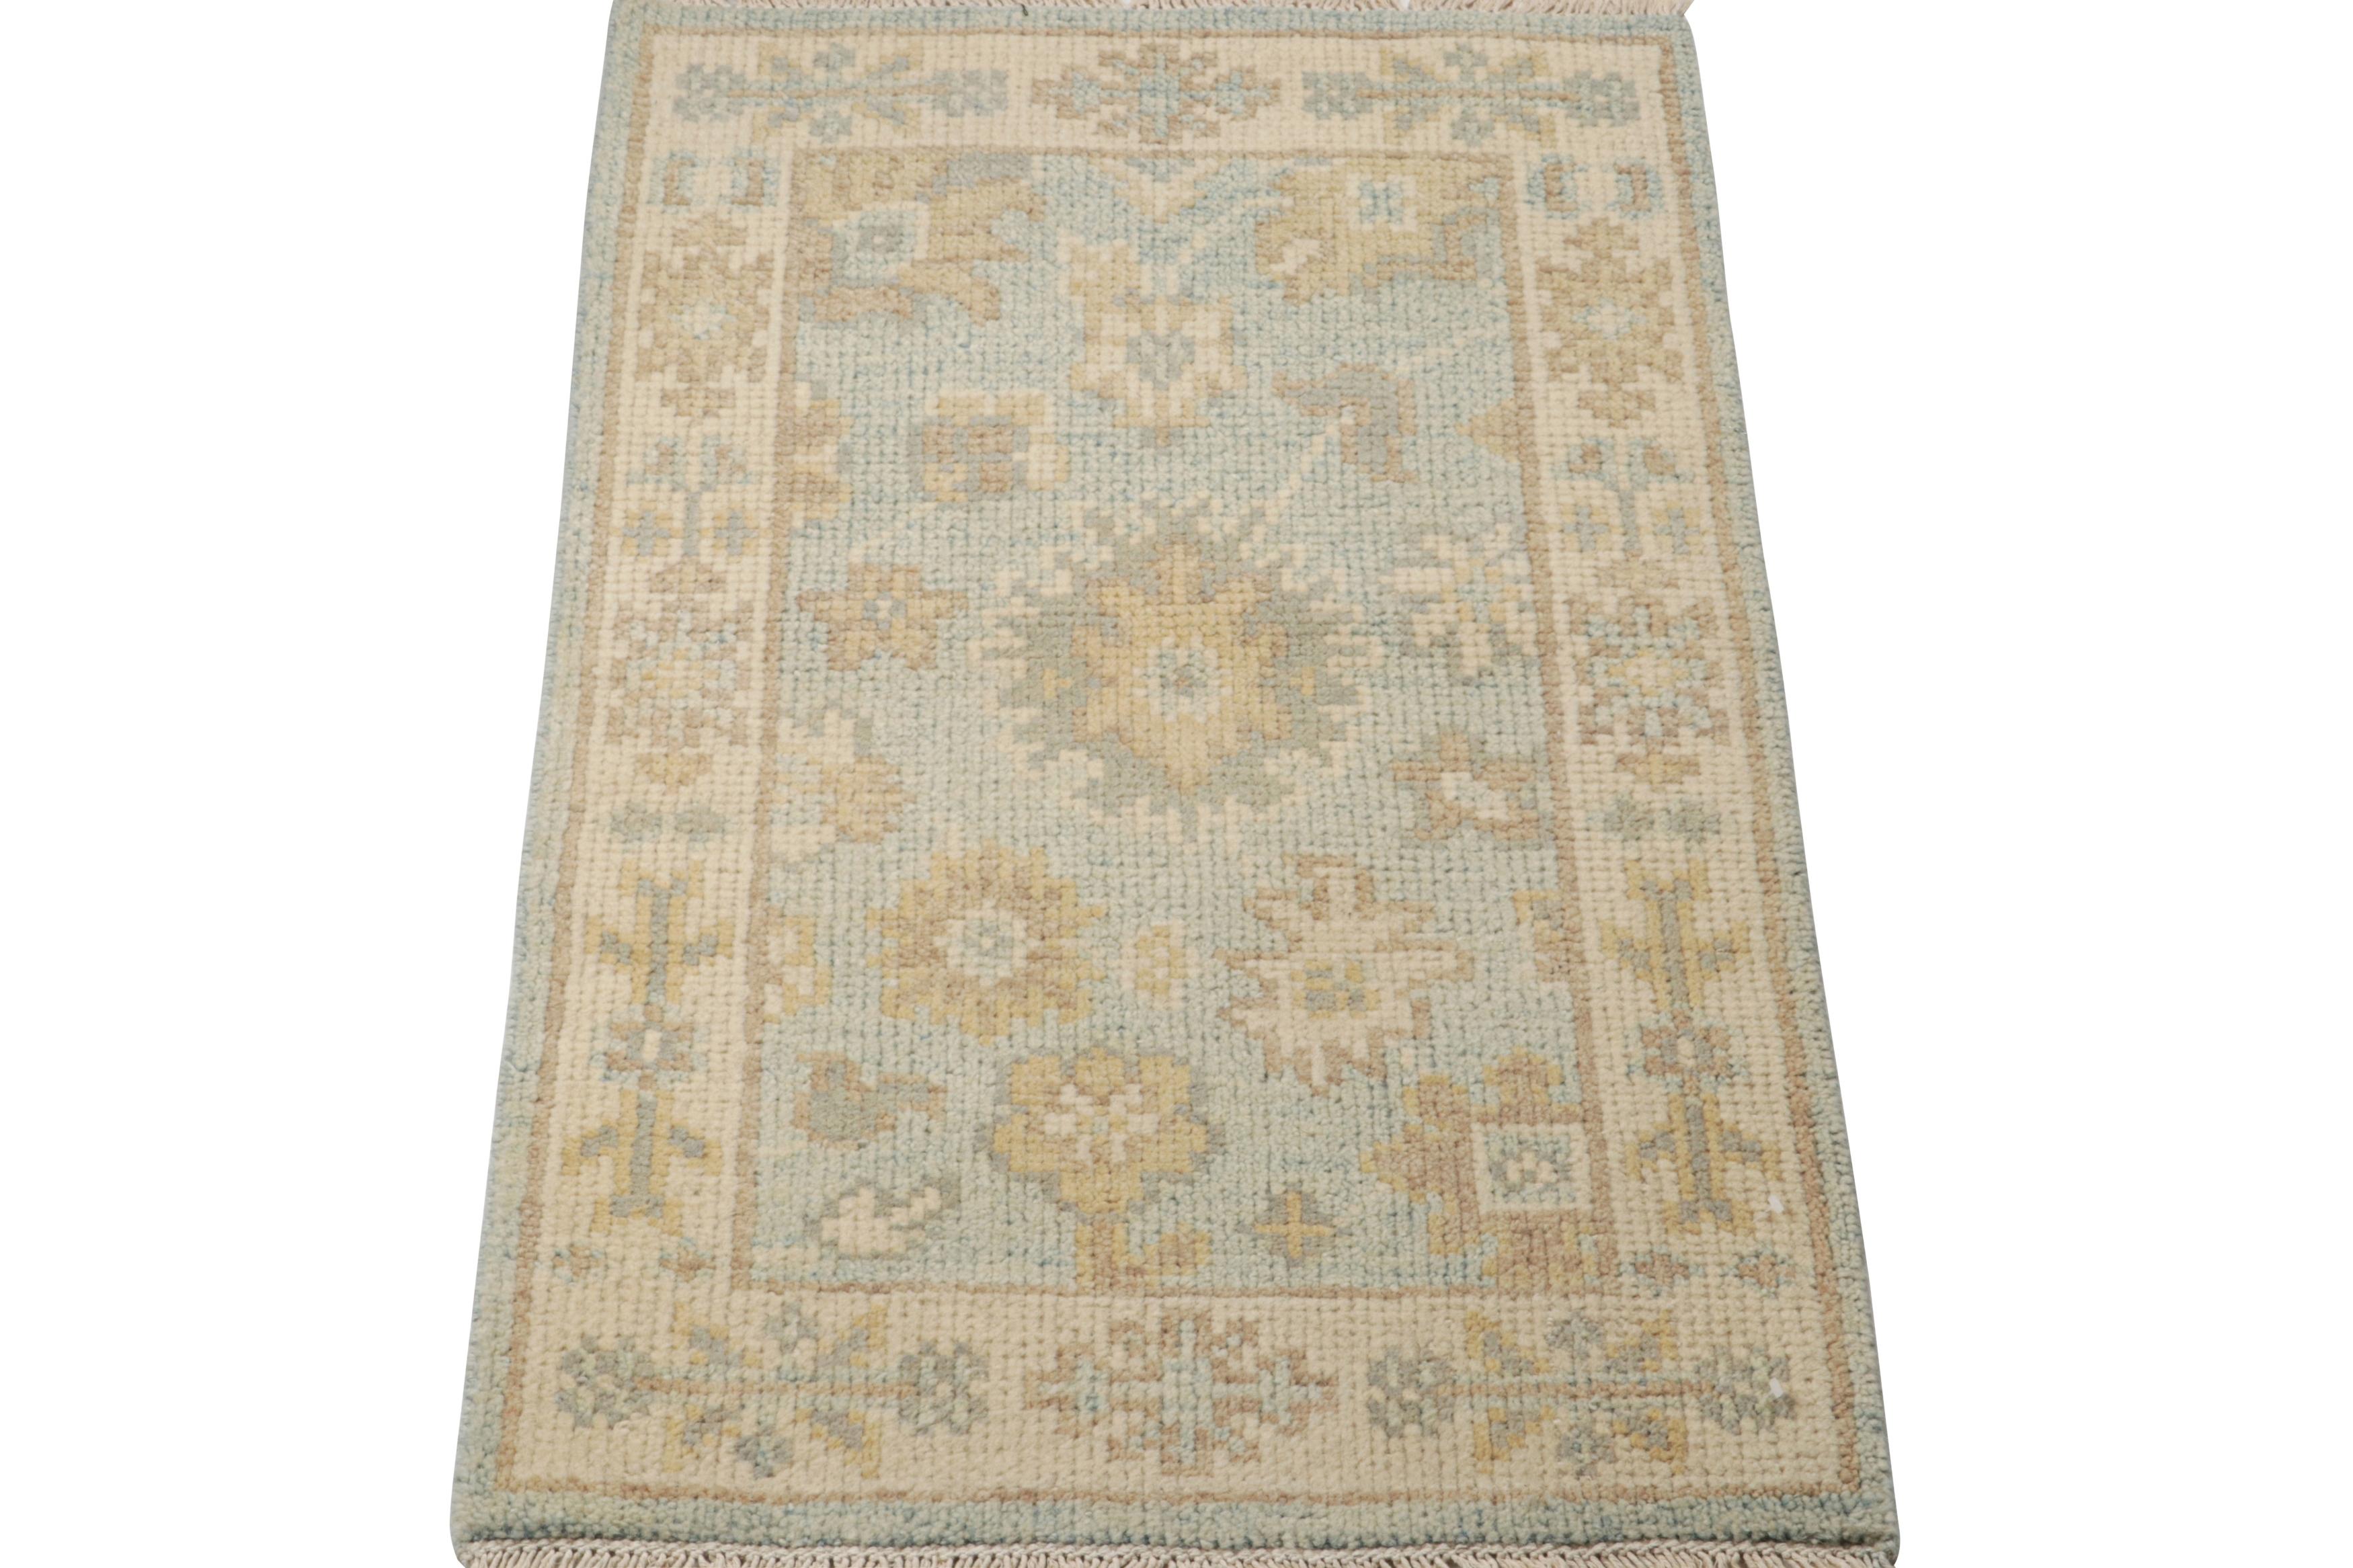 Tribal Rug & Kilim’s Oushak Style Rug in Blue with Beige-Brown Floral Patterns For Sale